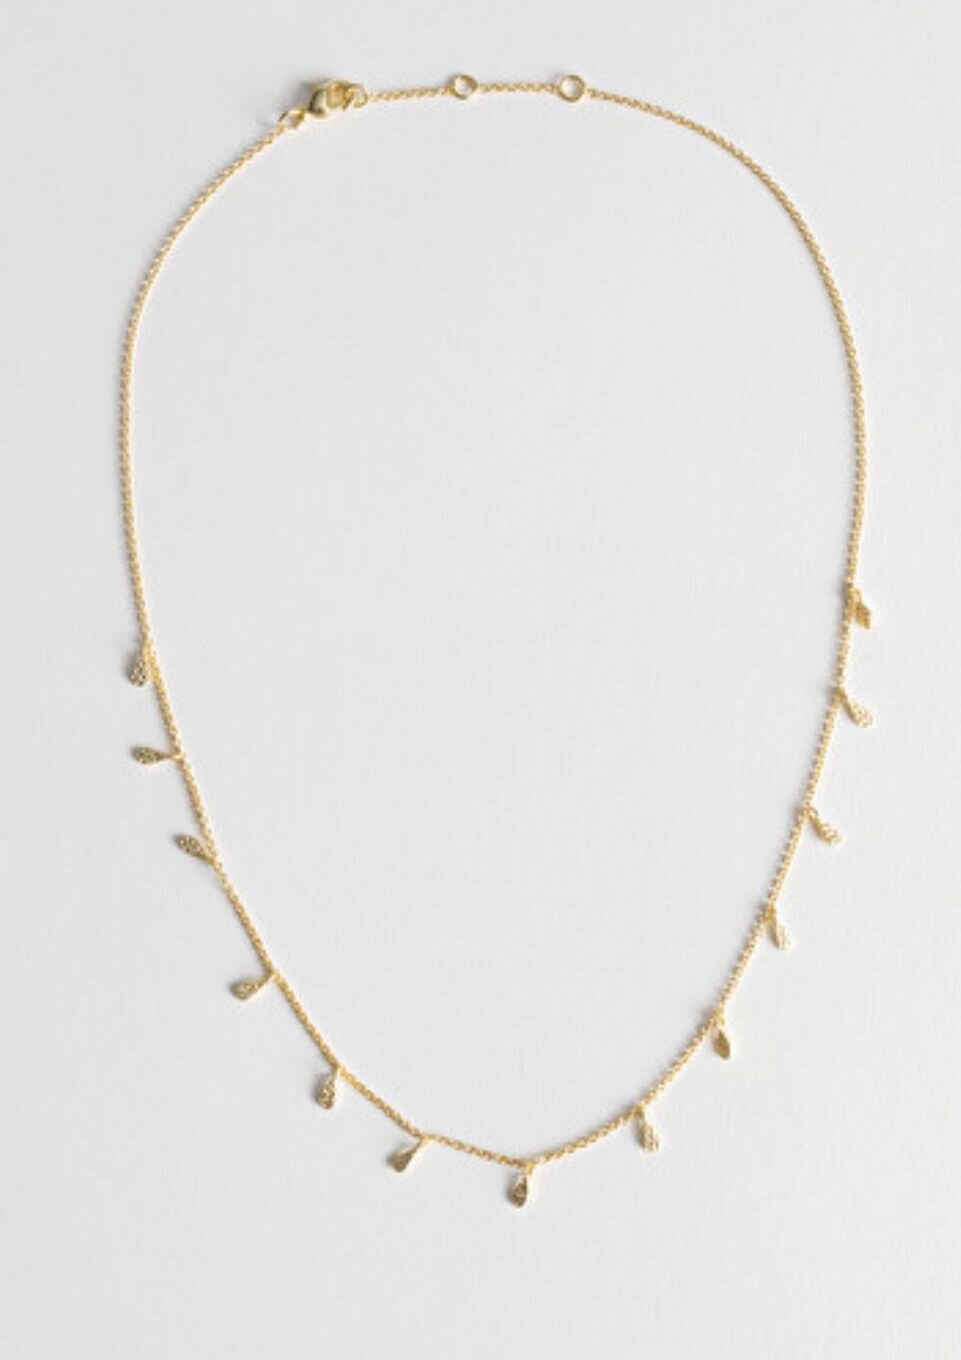 Other Stories Necklace.jpg